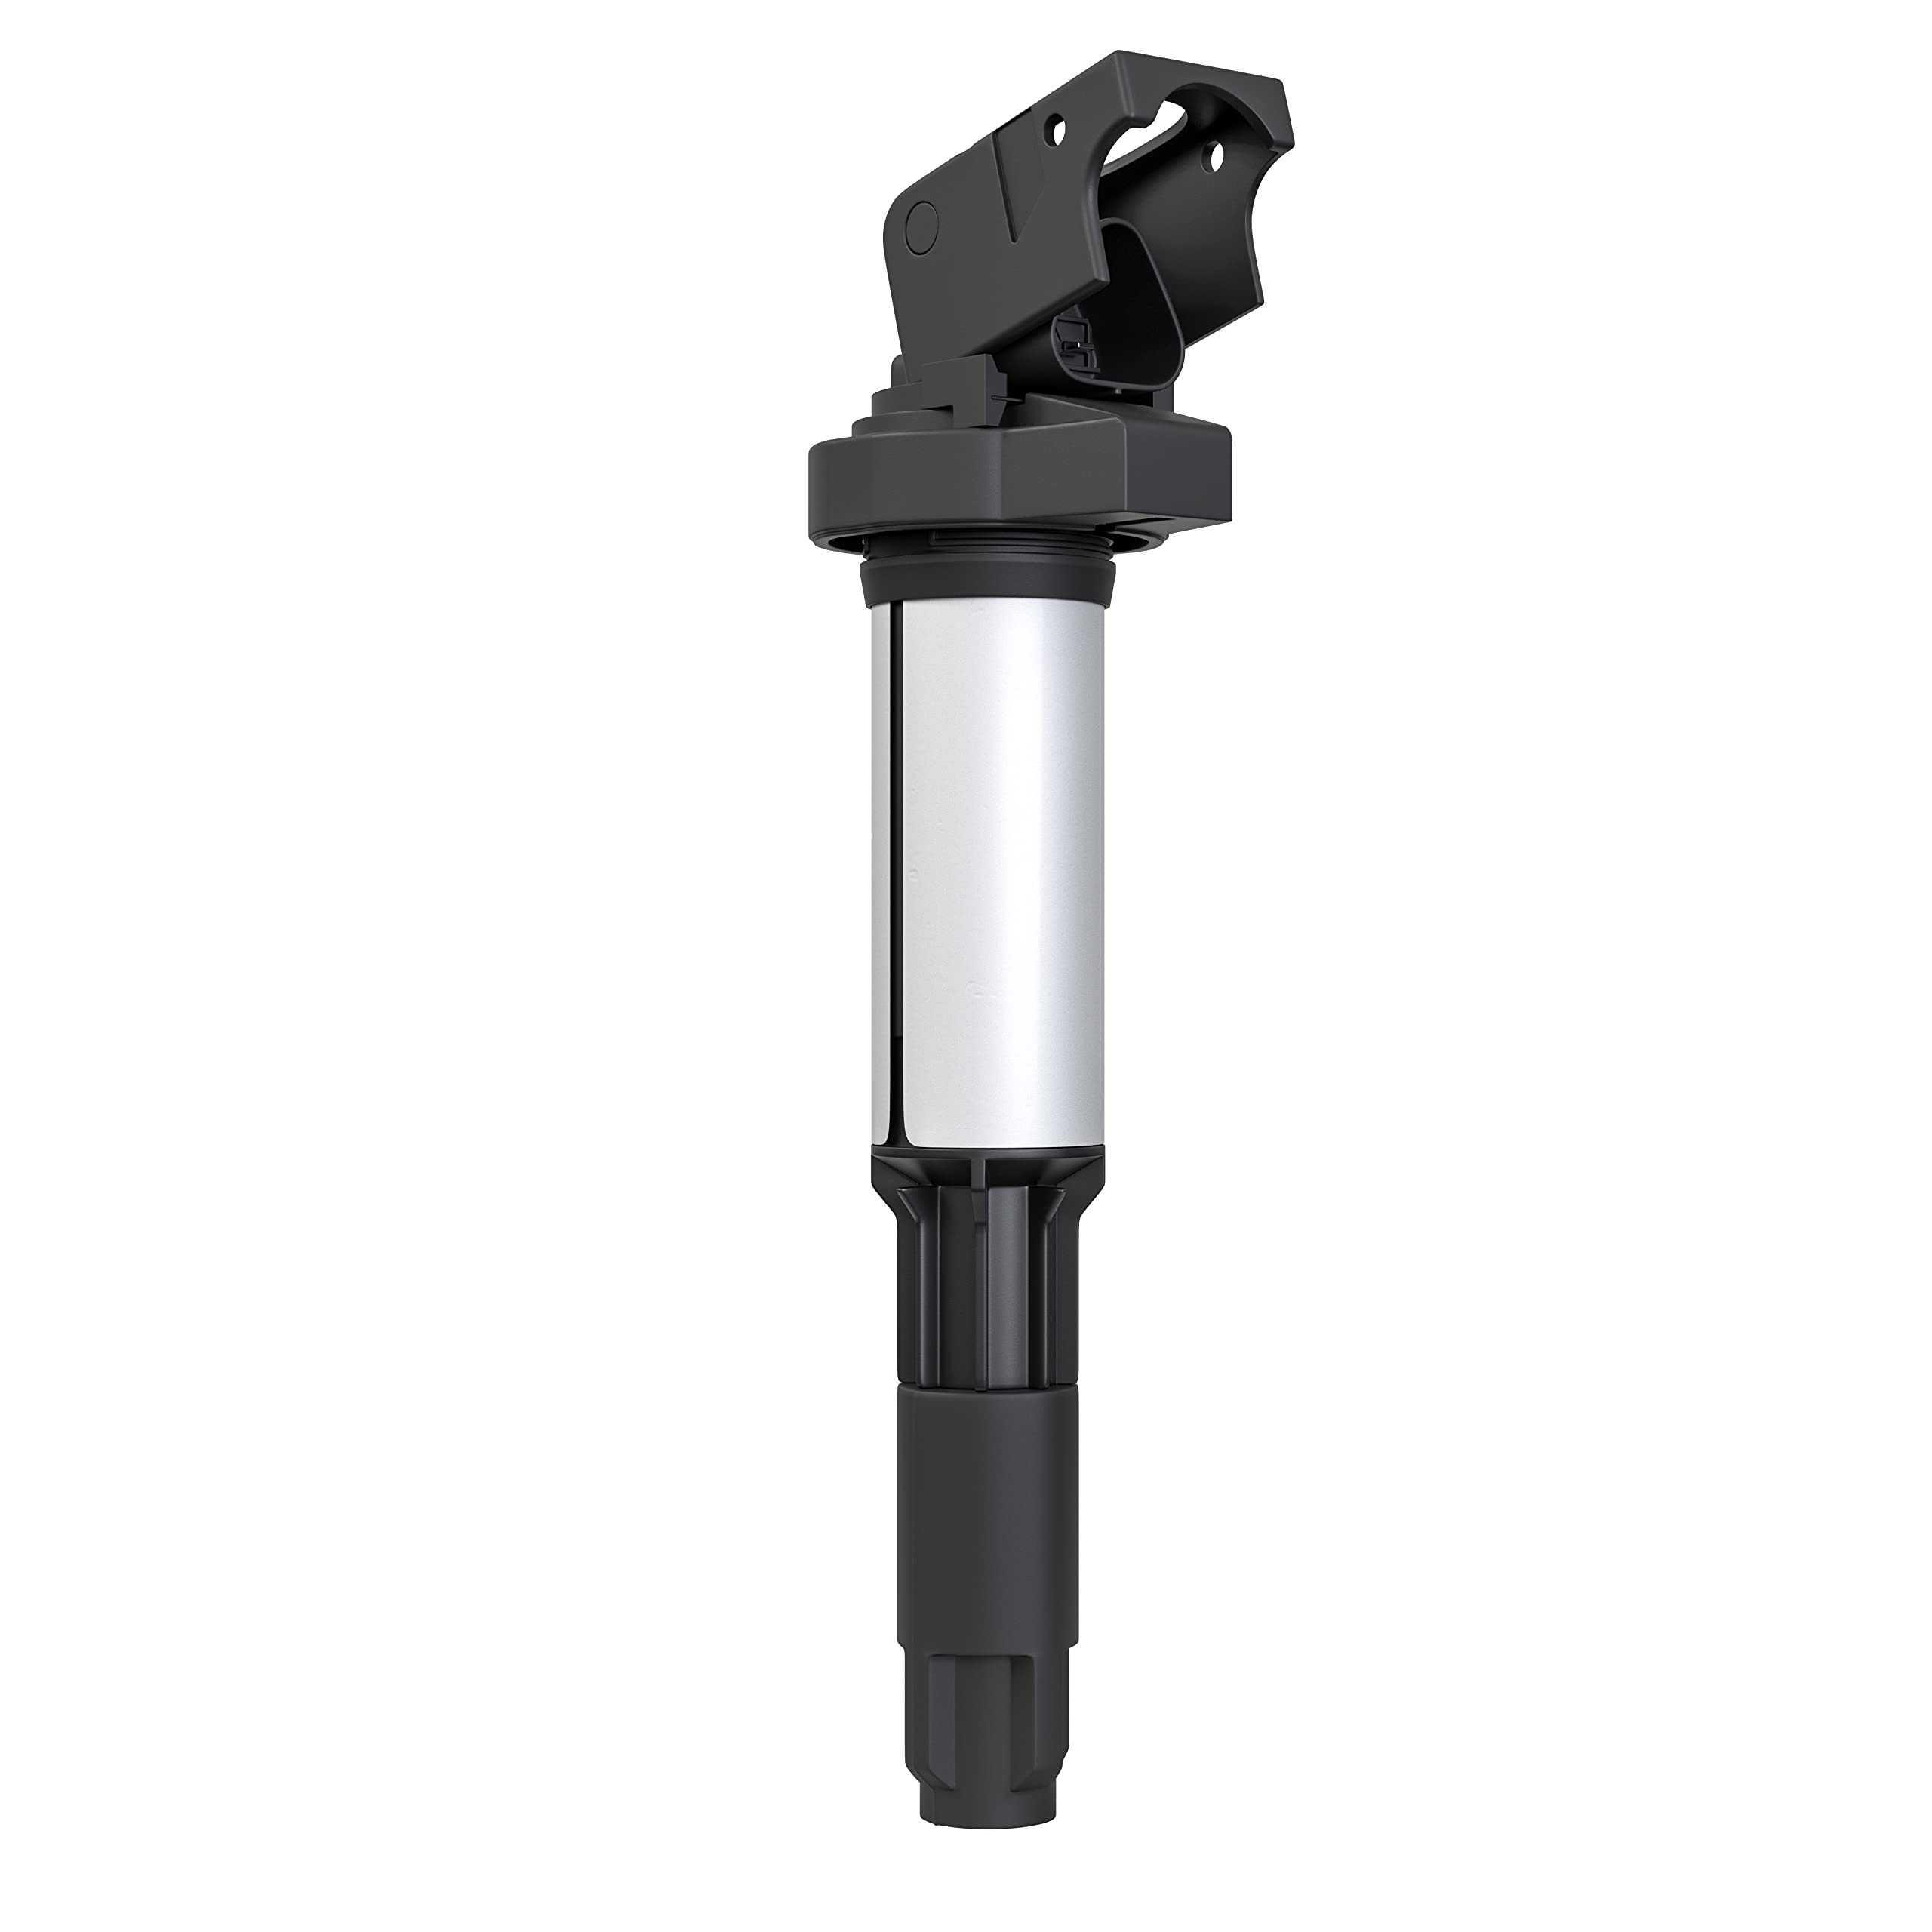 Ignition Coil Pack - Compatible with BMW Vehicles - 325i, 328i, 325ci, 330ci, 335i, 525i, 545i, 745Li, X3, X5 and more - Replaces GN10328, 12137594936  - Like New